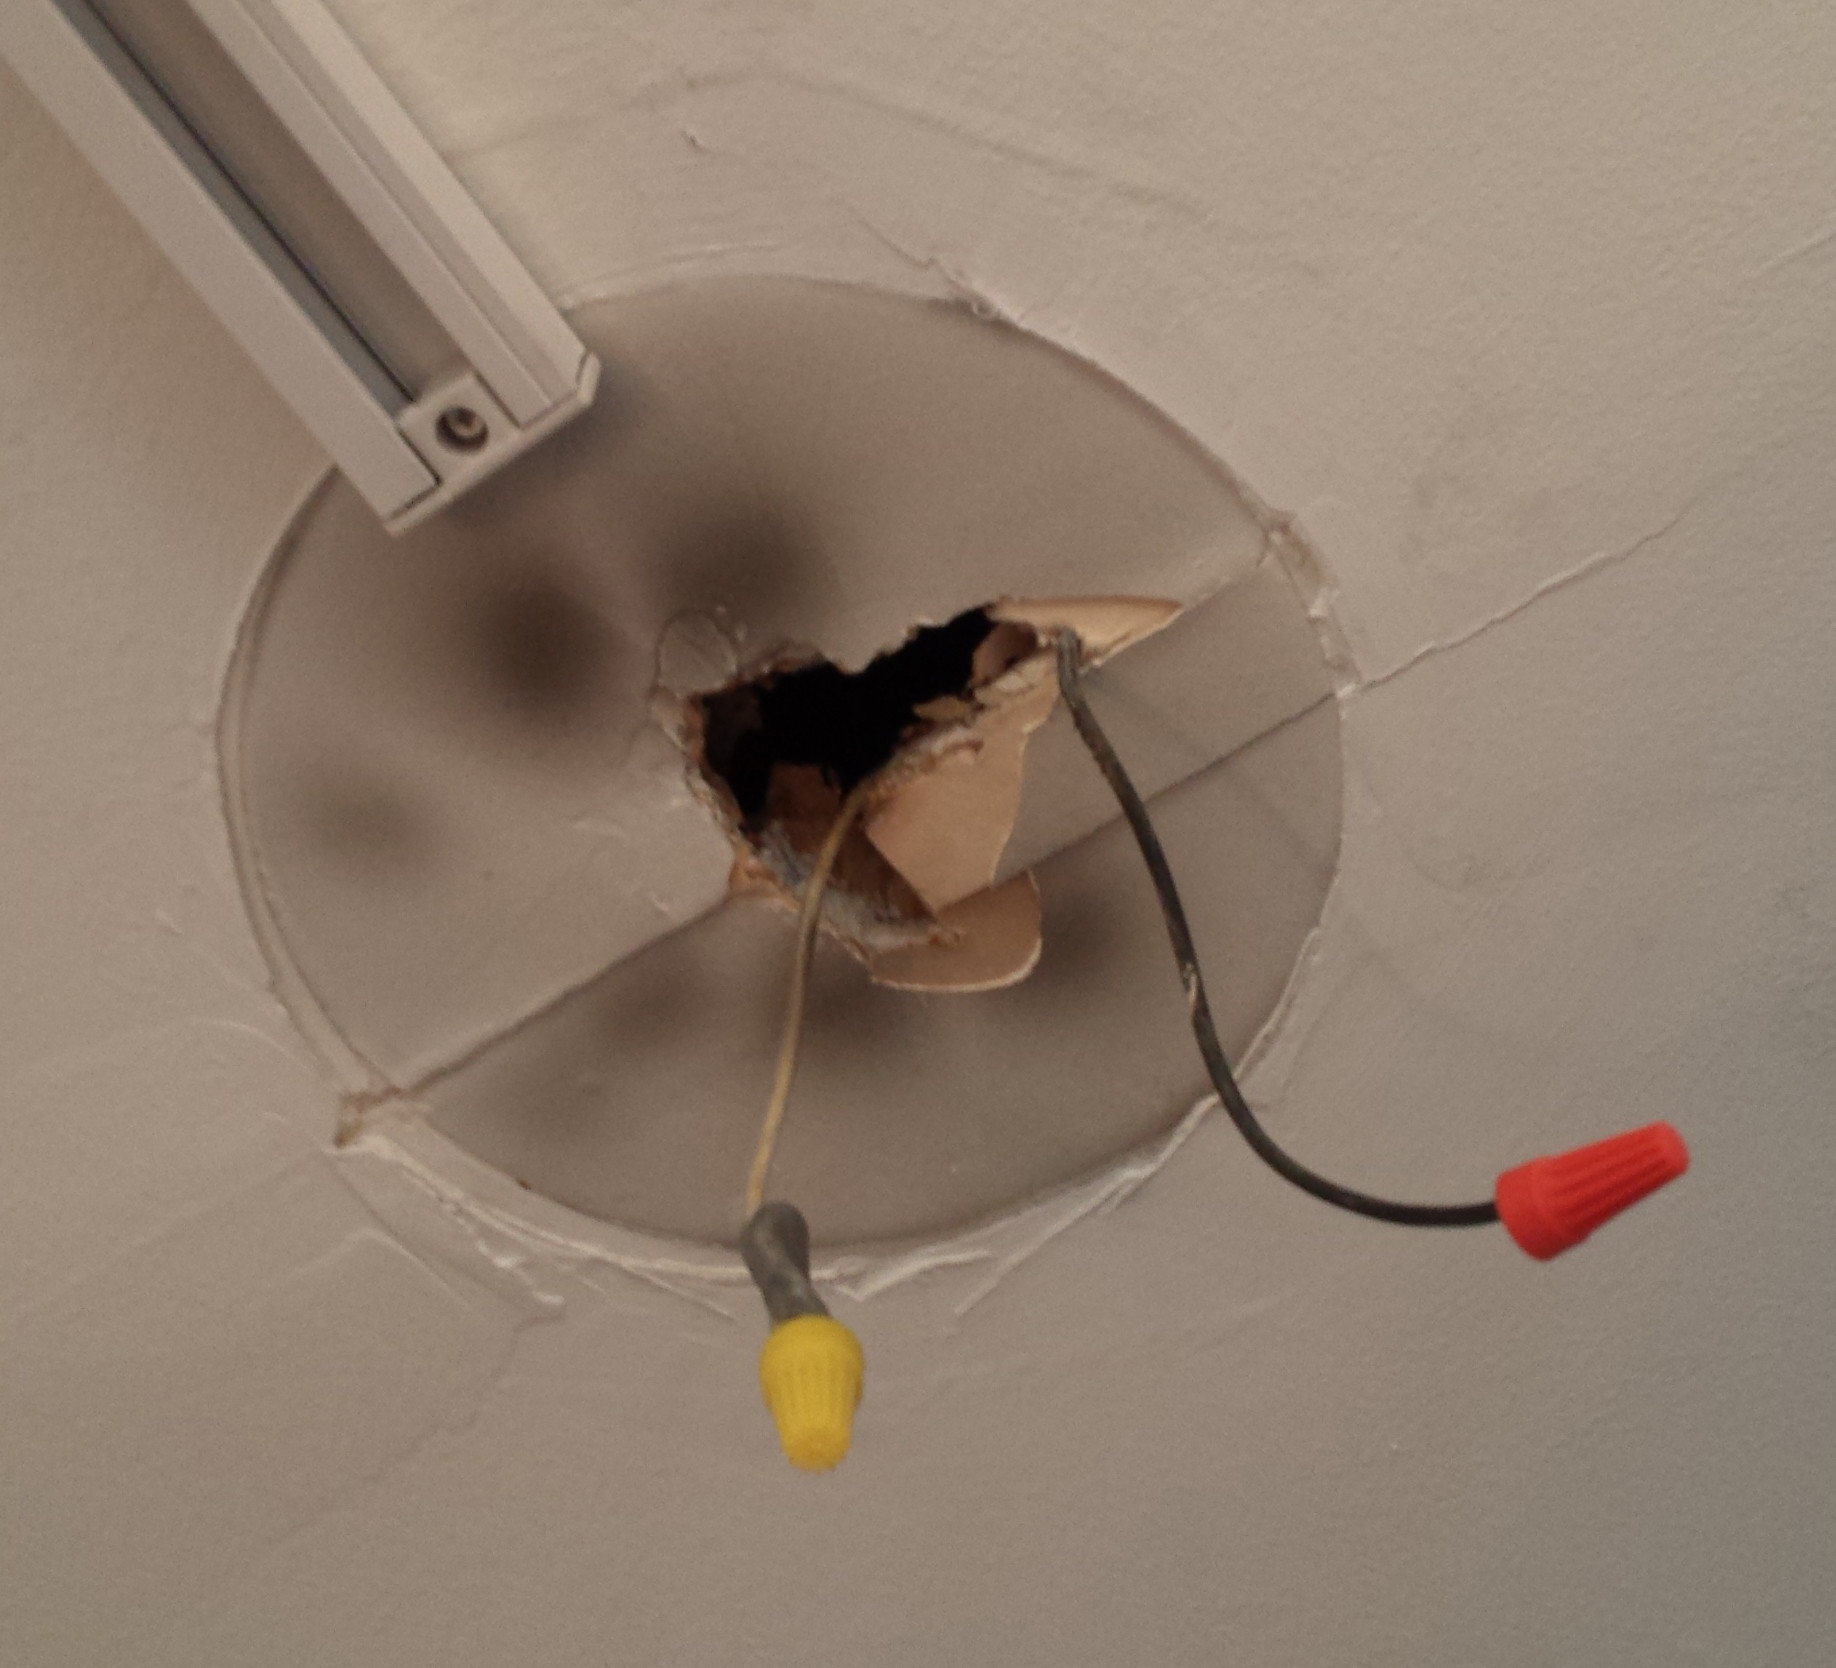 Permalink to Wiring Ceiling Light No Ground